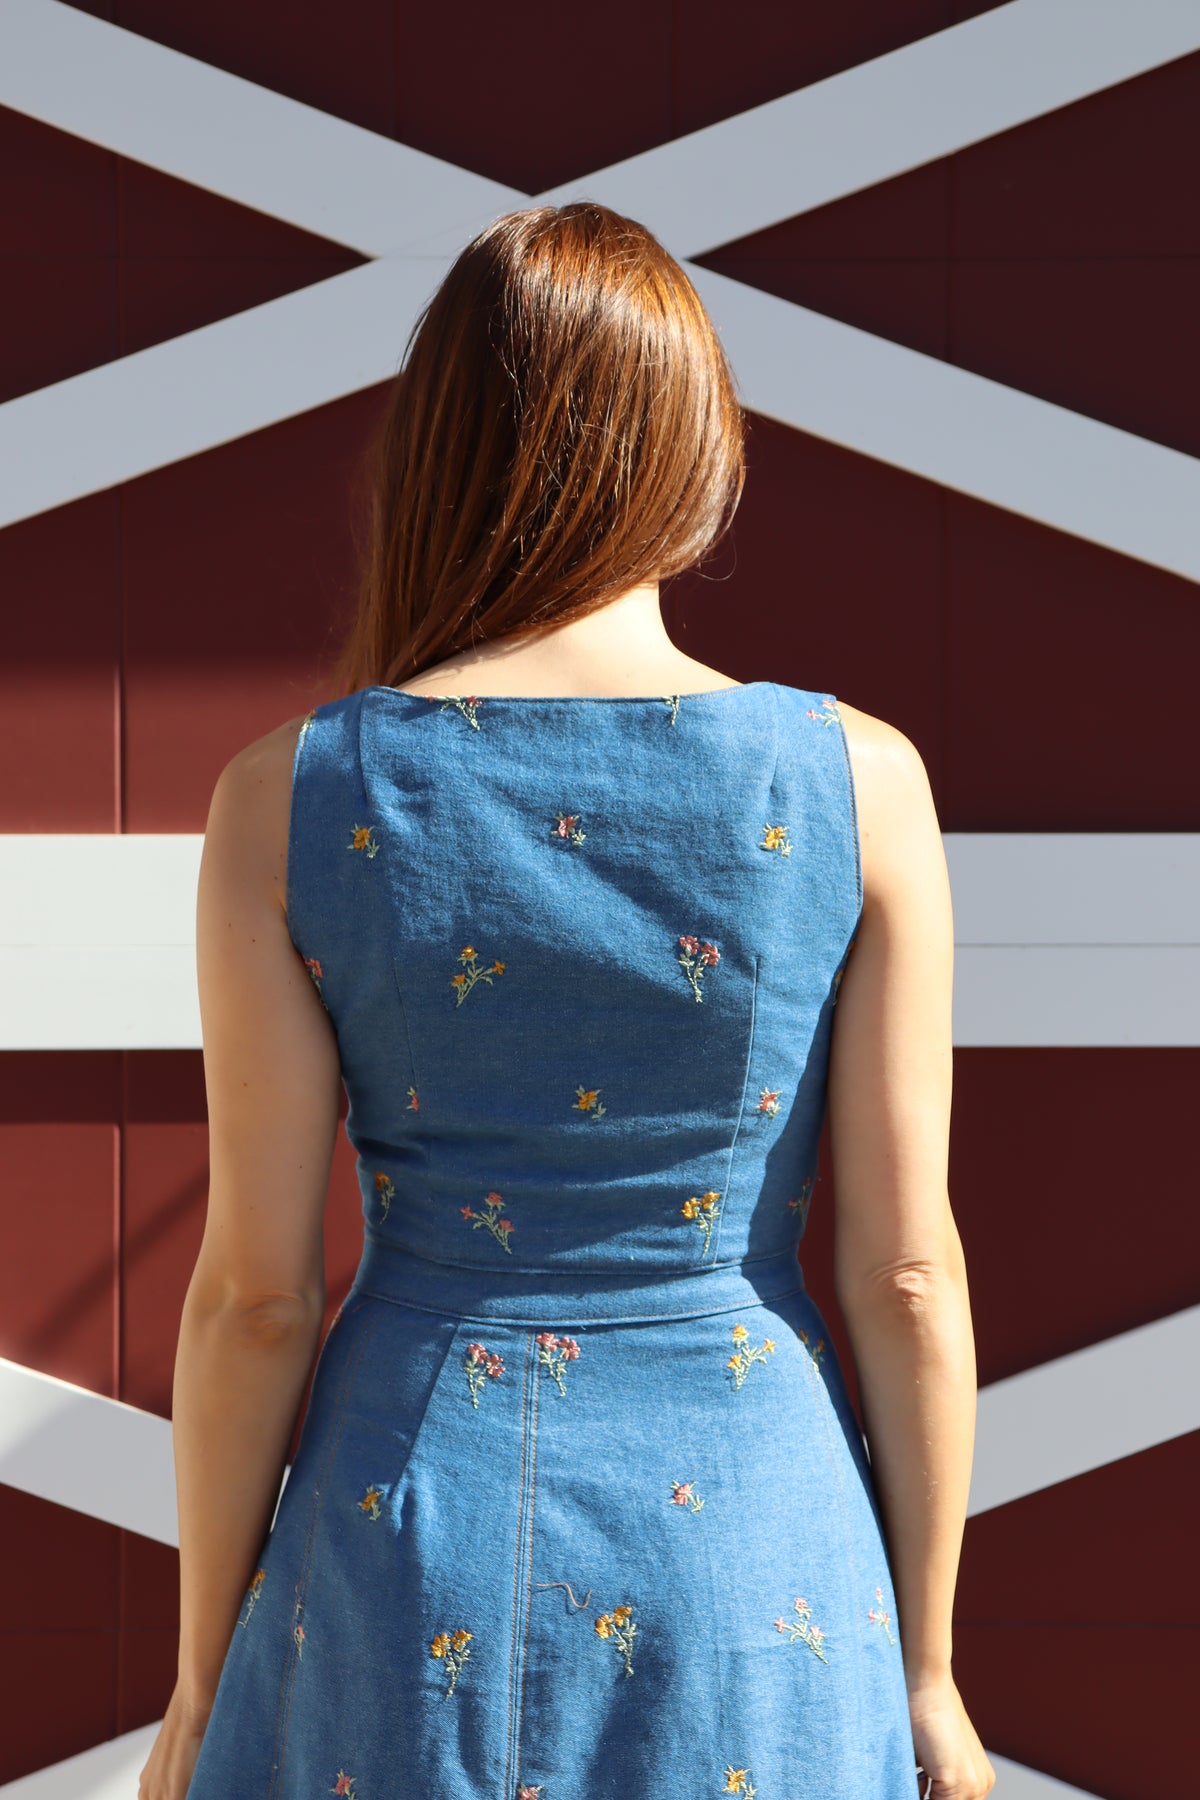 Back view of model wearing Flower Child floral embroidered denim Crop Top.